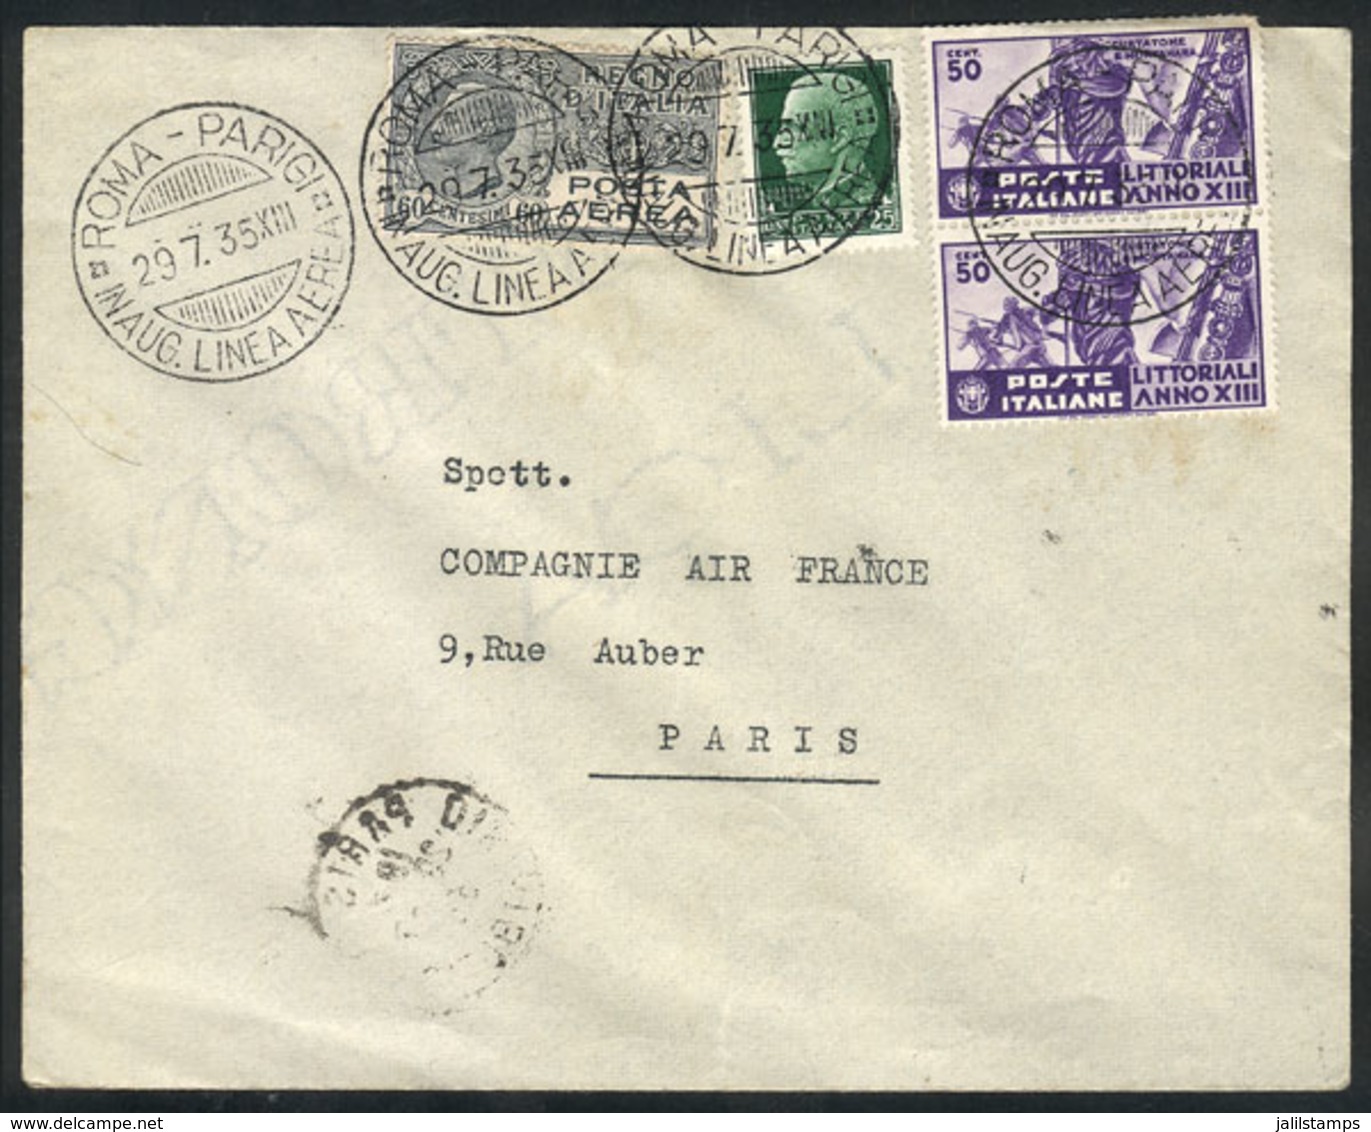 725 ITALY: 29/JUL/1935 Roma - Paris: First Flight By Air France, Cover Of Very Fine Quality! - Unclassified